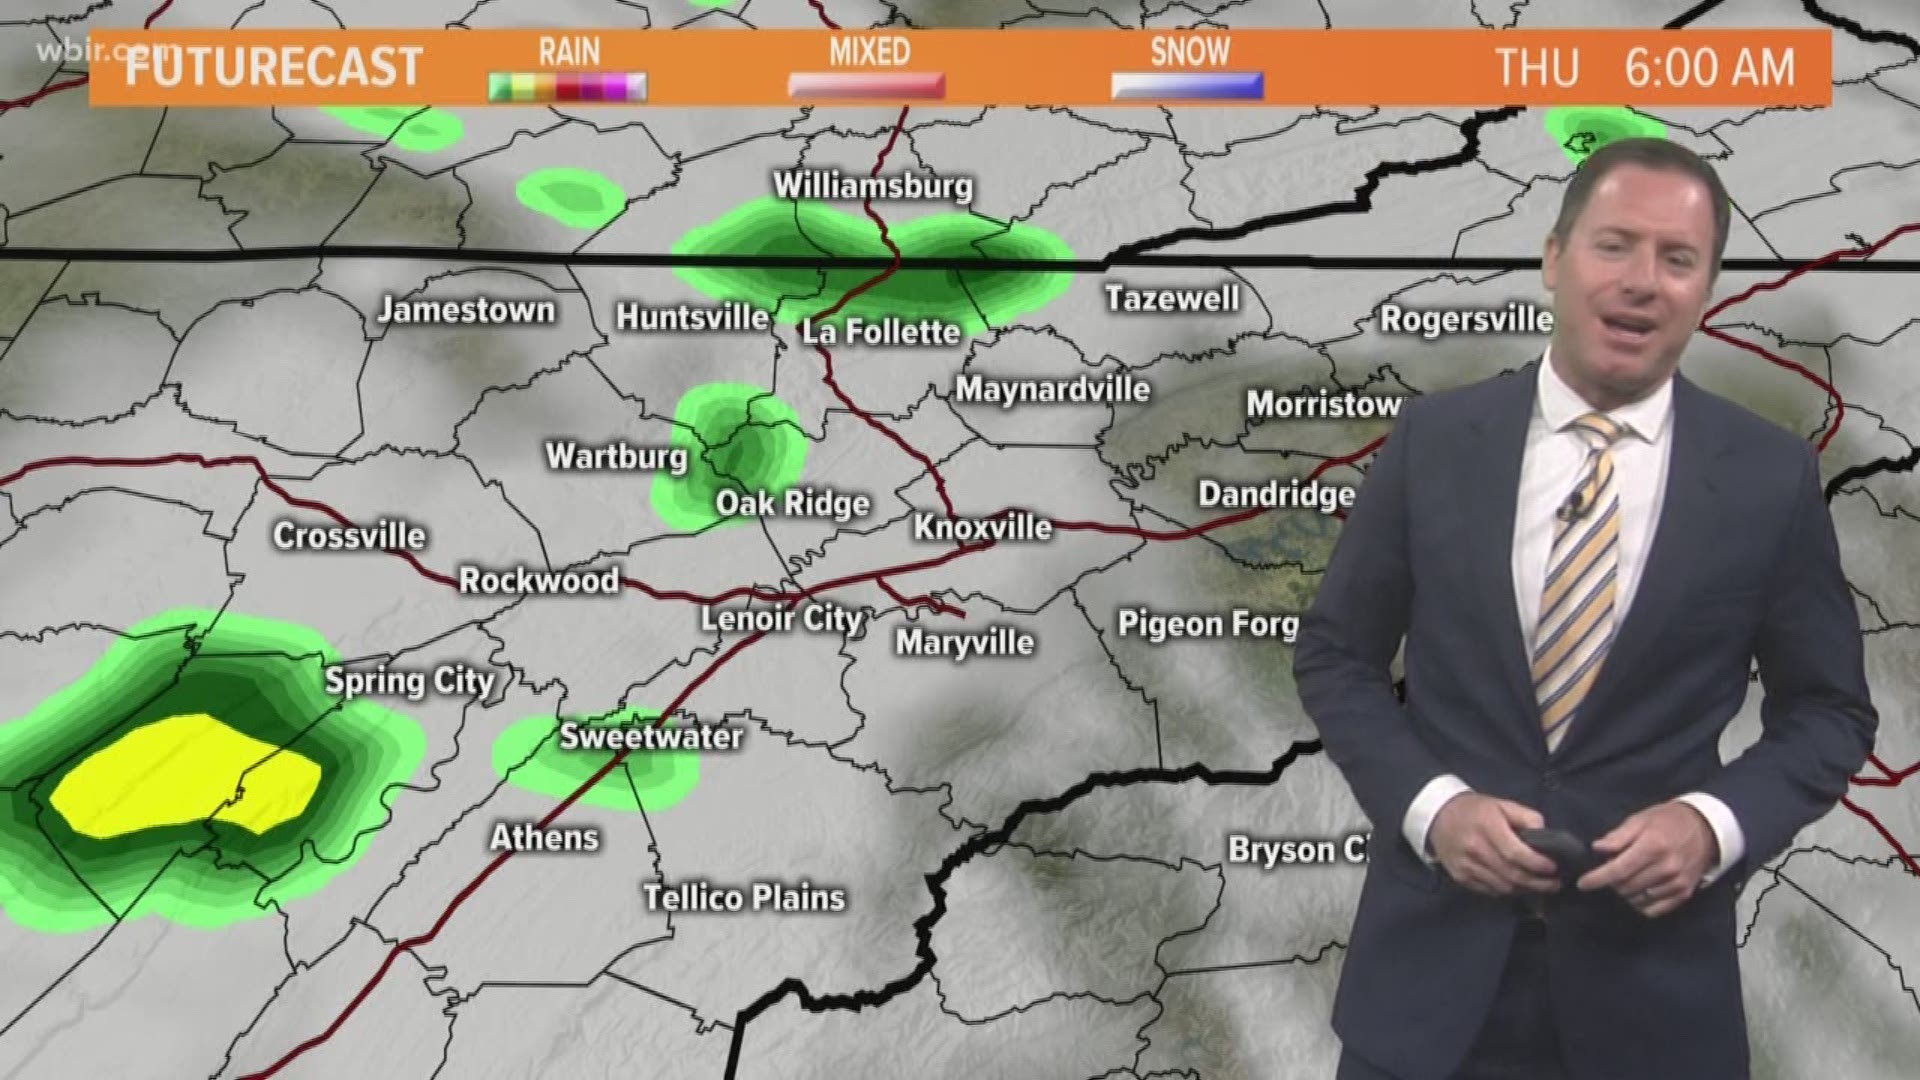 Cloudy with a chance for scattered showers